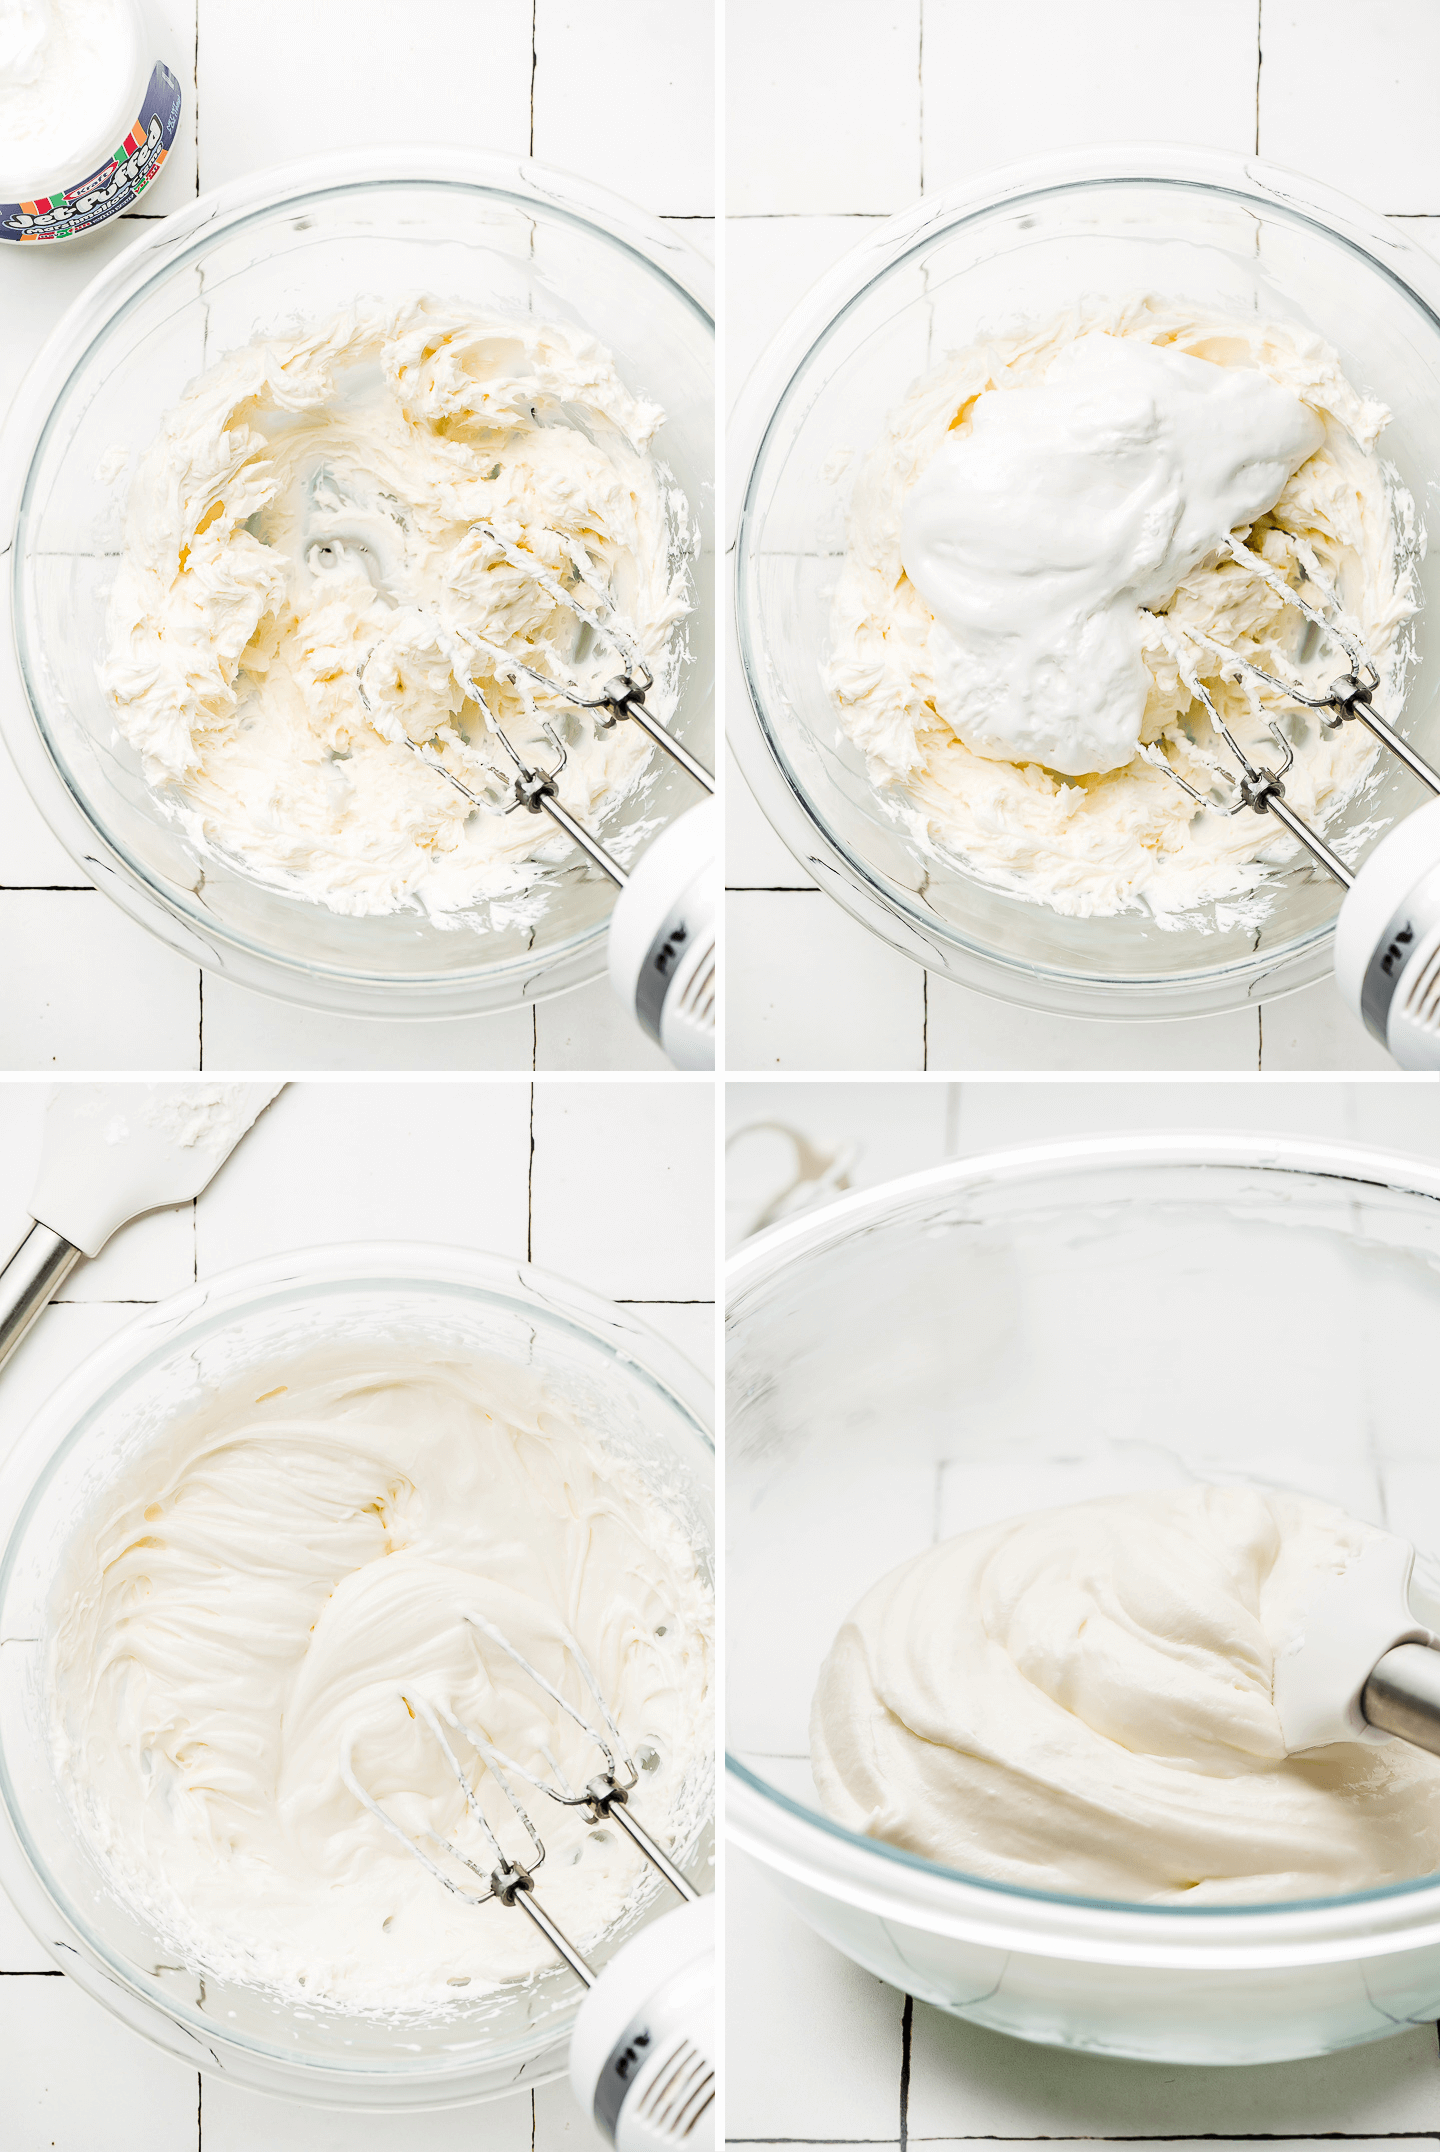 Mixing cream cheese and marshmallow fluff together to make a dip.